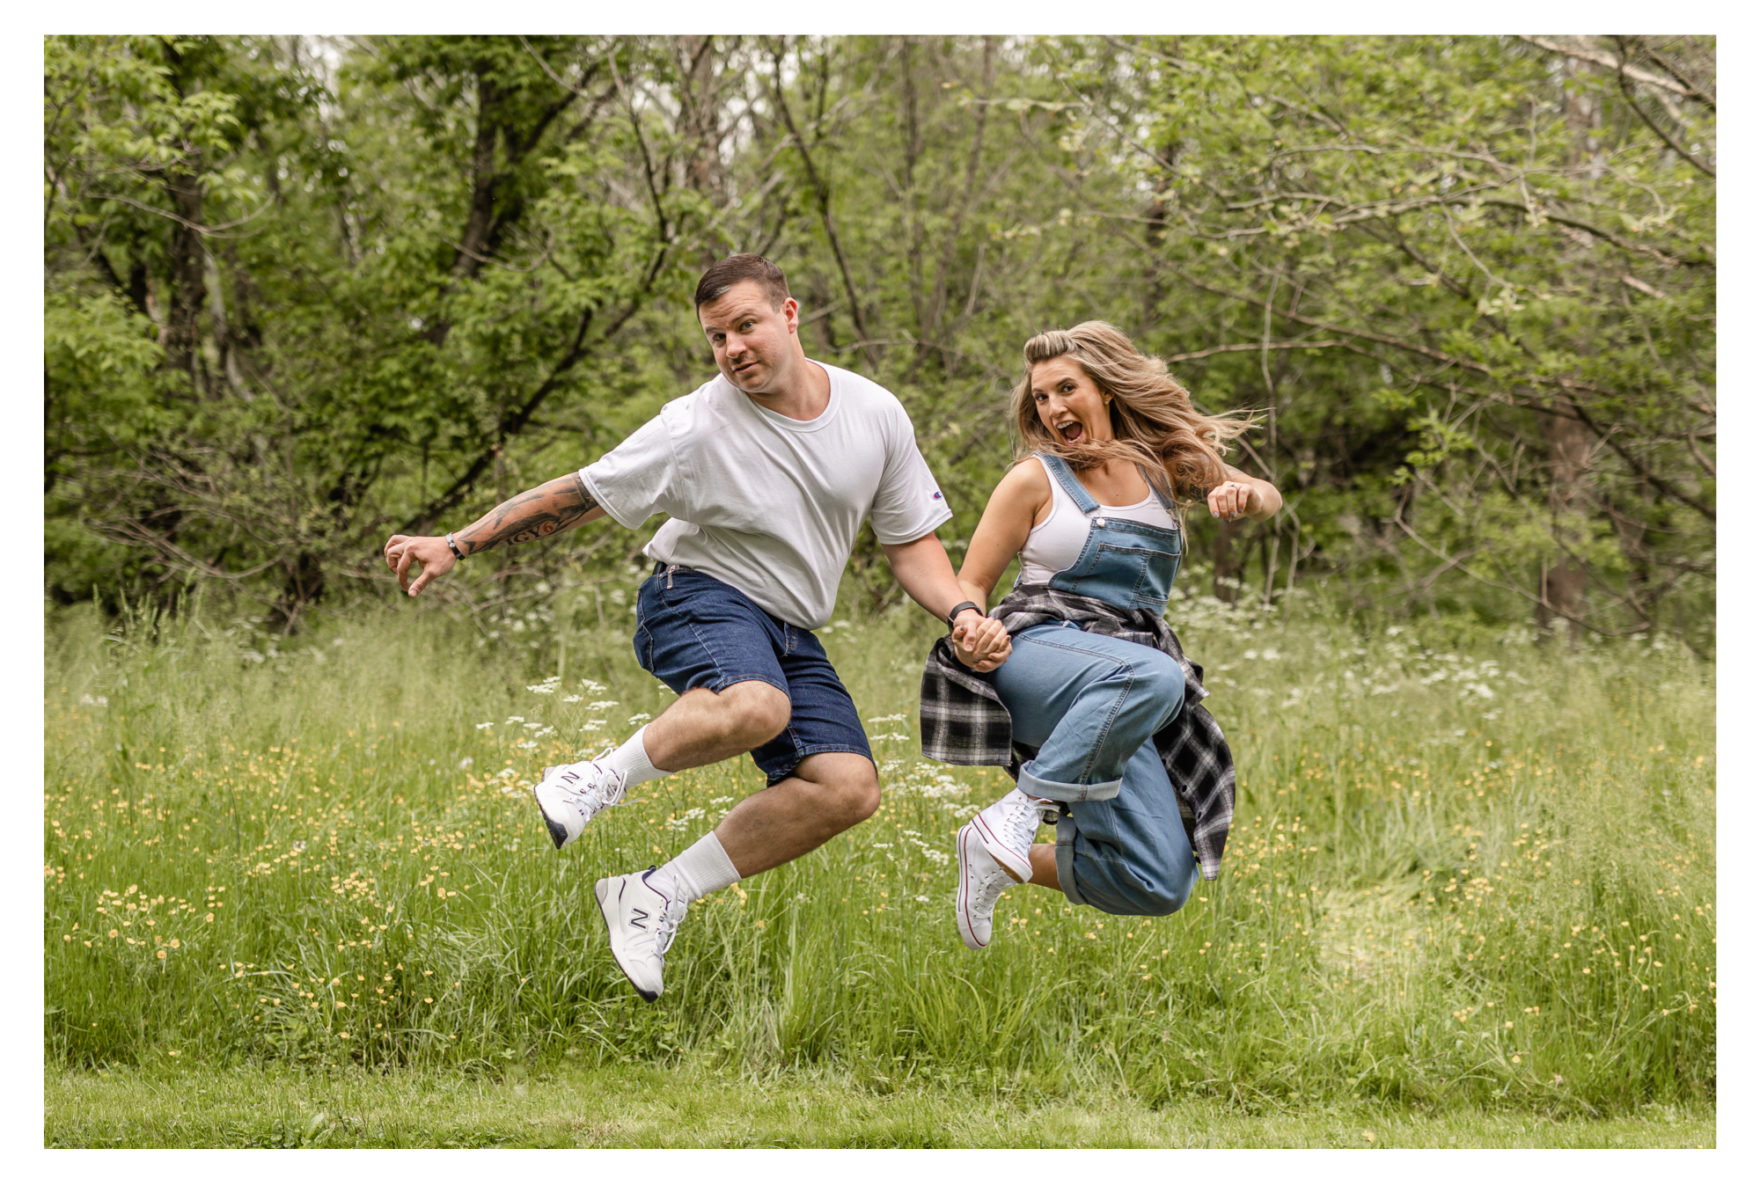 90's theme. 90's photo session. 90's awkward photos. 90's couple photos. 90's couple portraits. 90's couple glamour shots. 90's pregnancy announcement. new pair of genes. Jean overalls. Jorts. Dad Jeans. Mom Jeans. New balances. Awkward Couple Poses. Awkward portrait session.